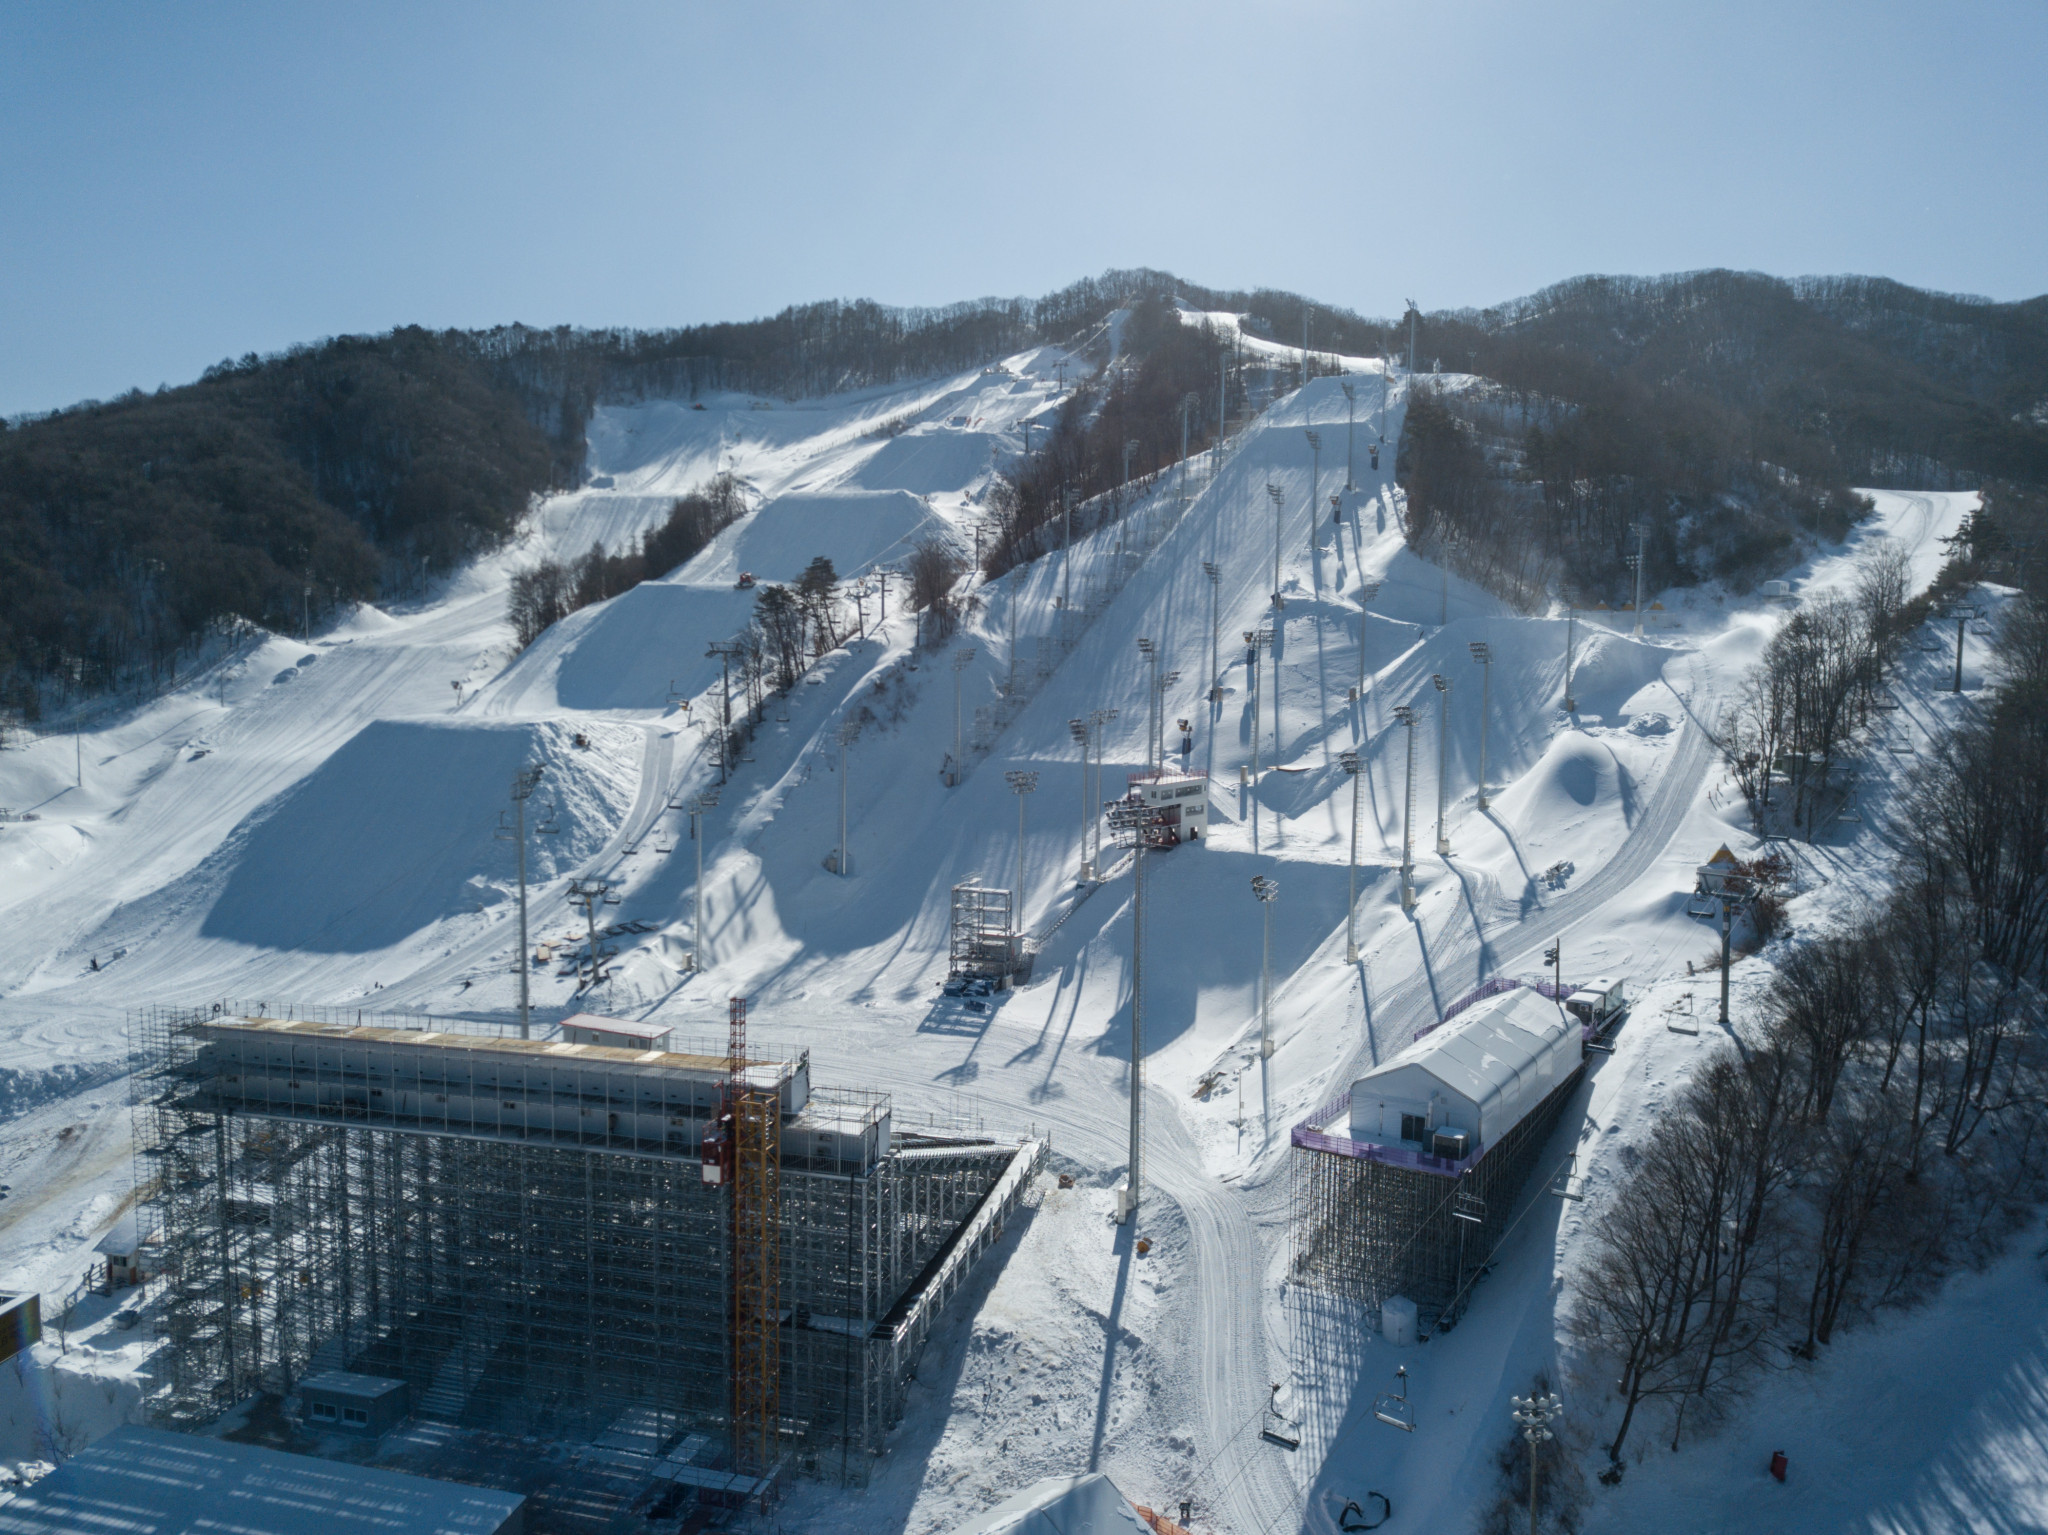 South Korea to keep snowboarders and mogul skiers out of Pyeongchang 2018 Athletes' Village